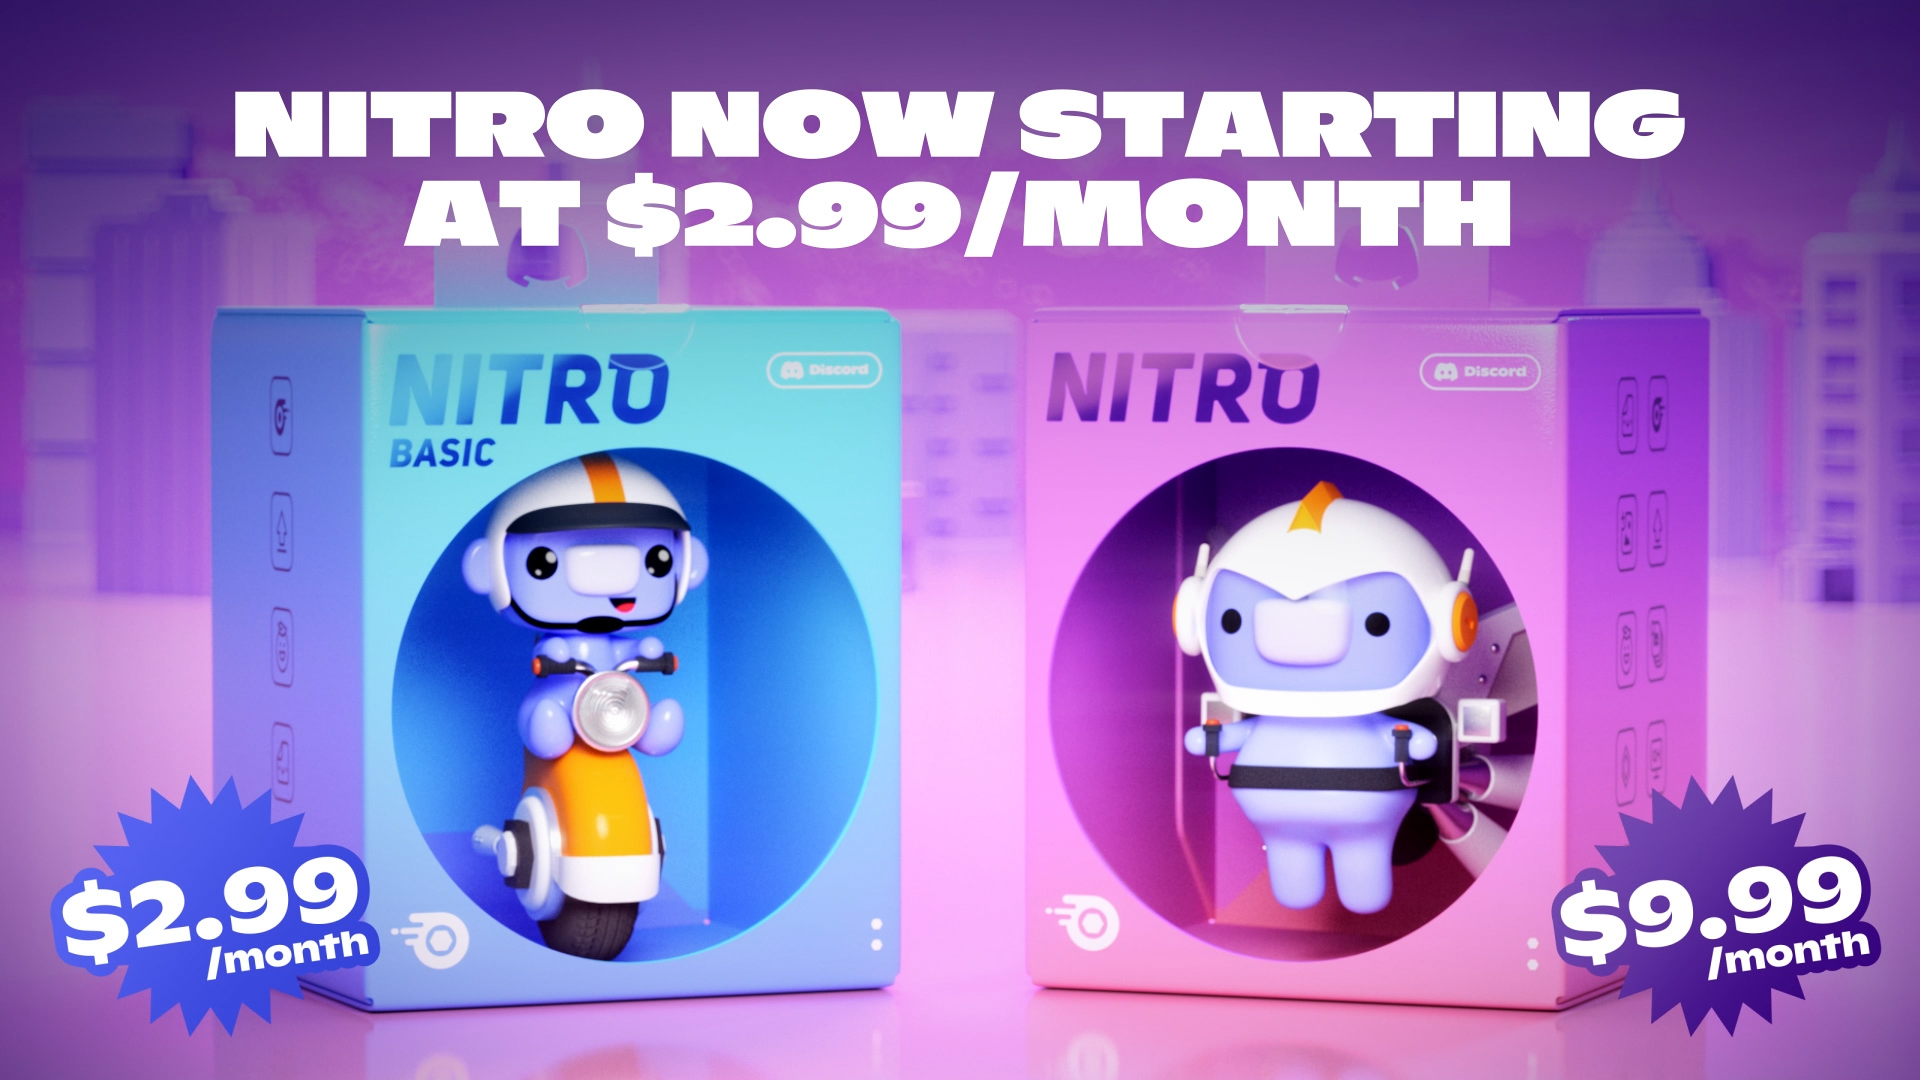 Discord Nitro and Discord basic plans shown side-by-side with pricing, represented by two Funko-Pop-style boxed figurines of the Discord mascot.